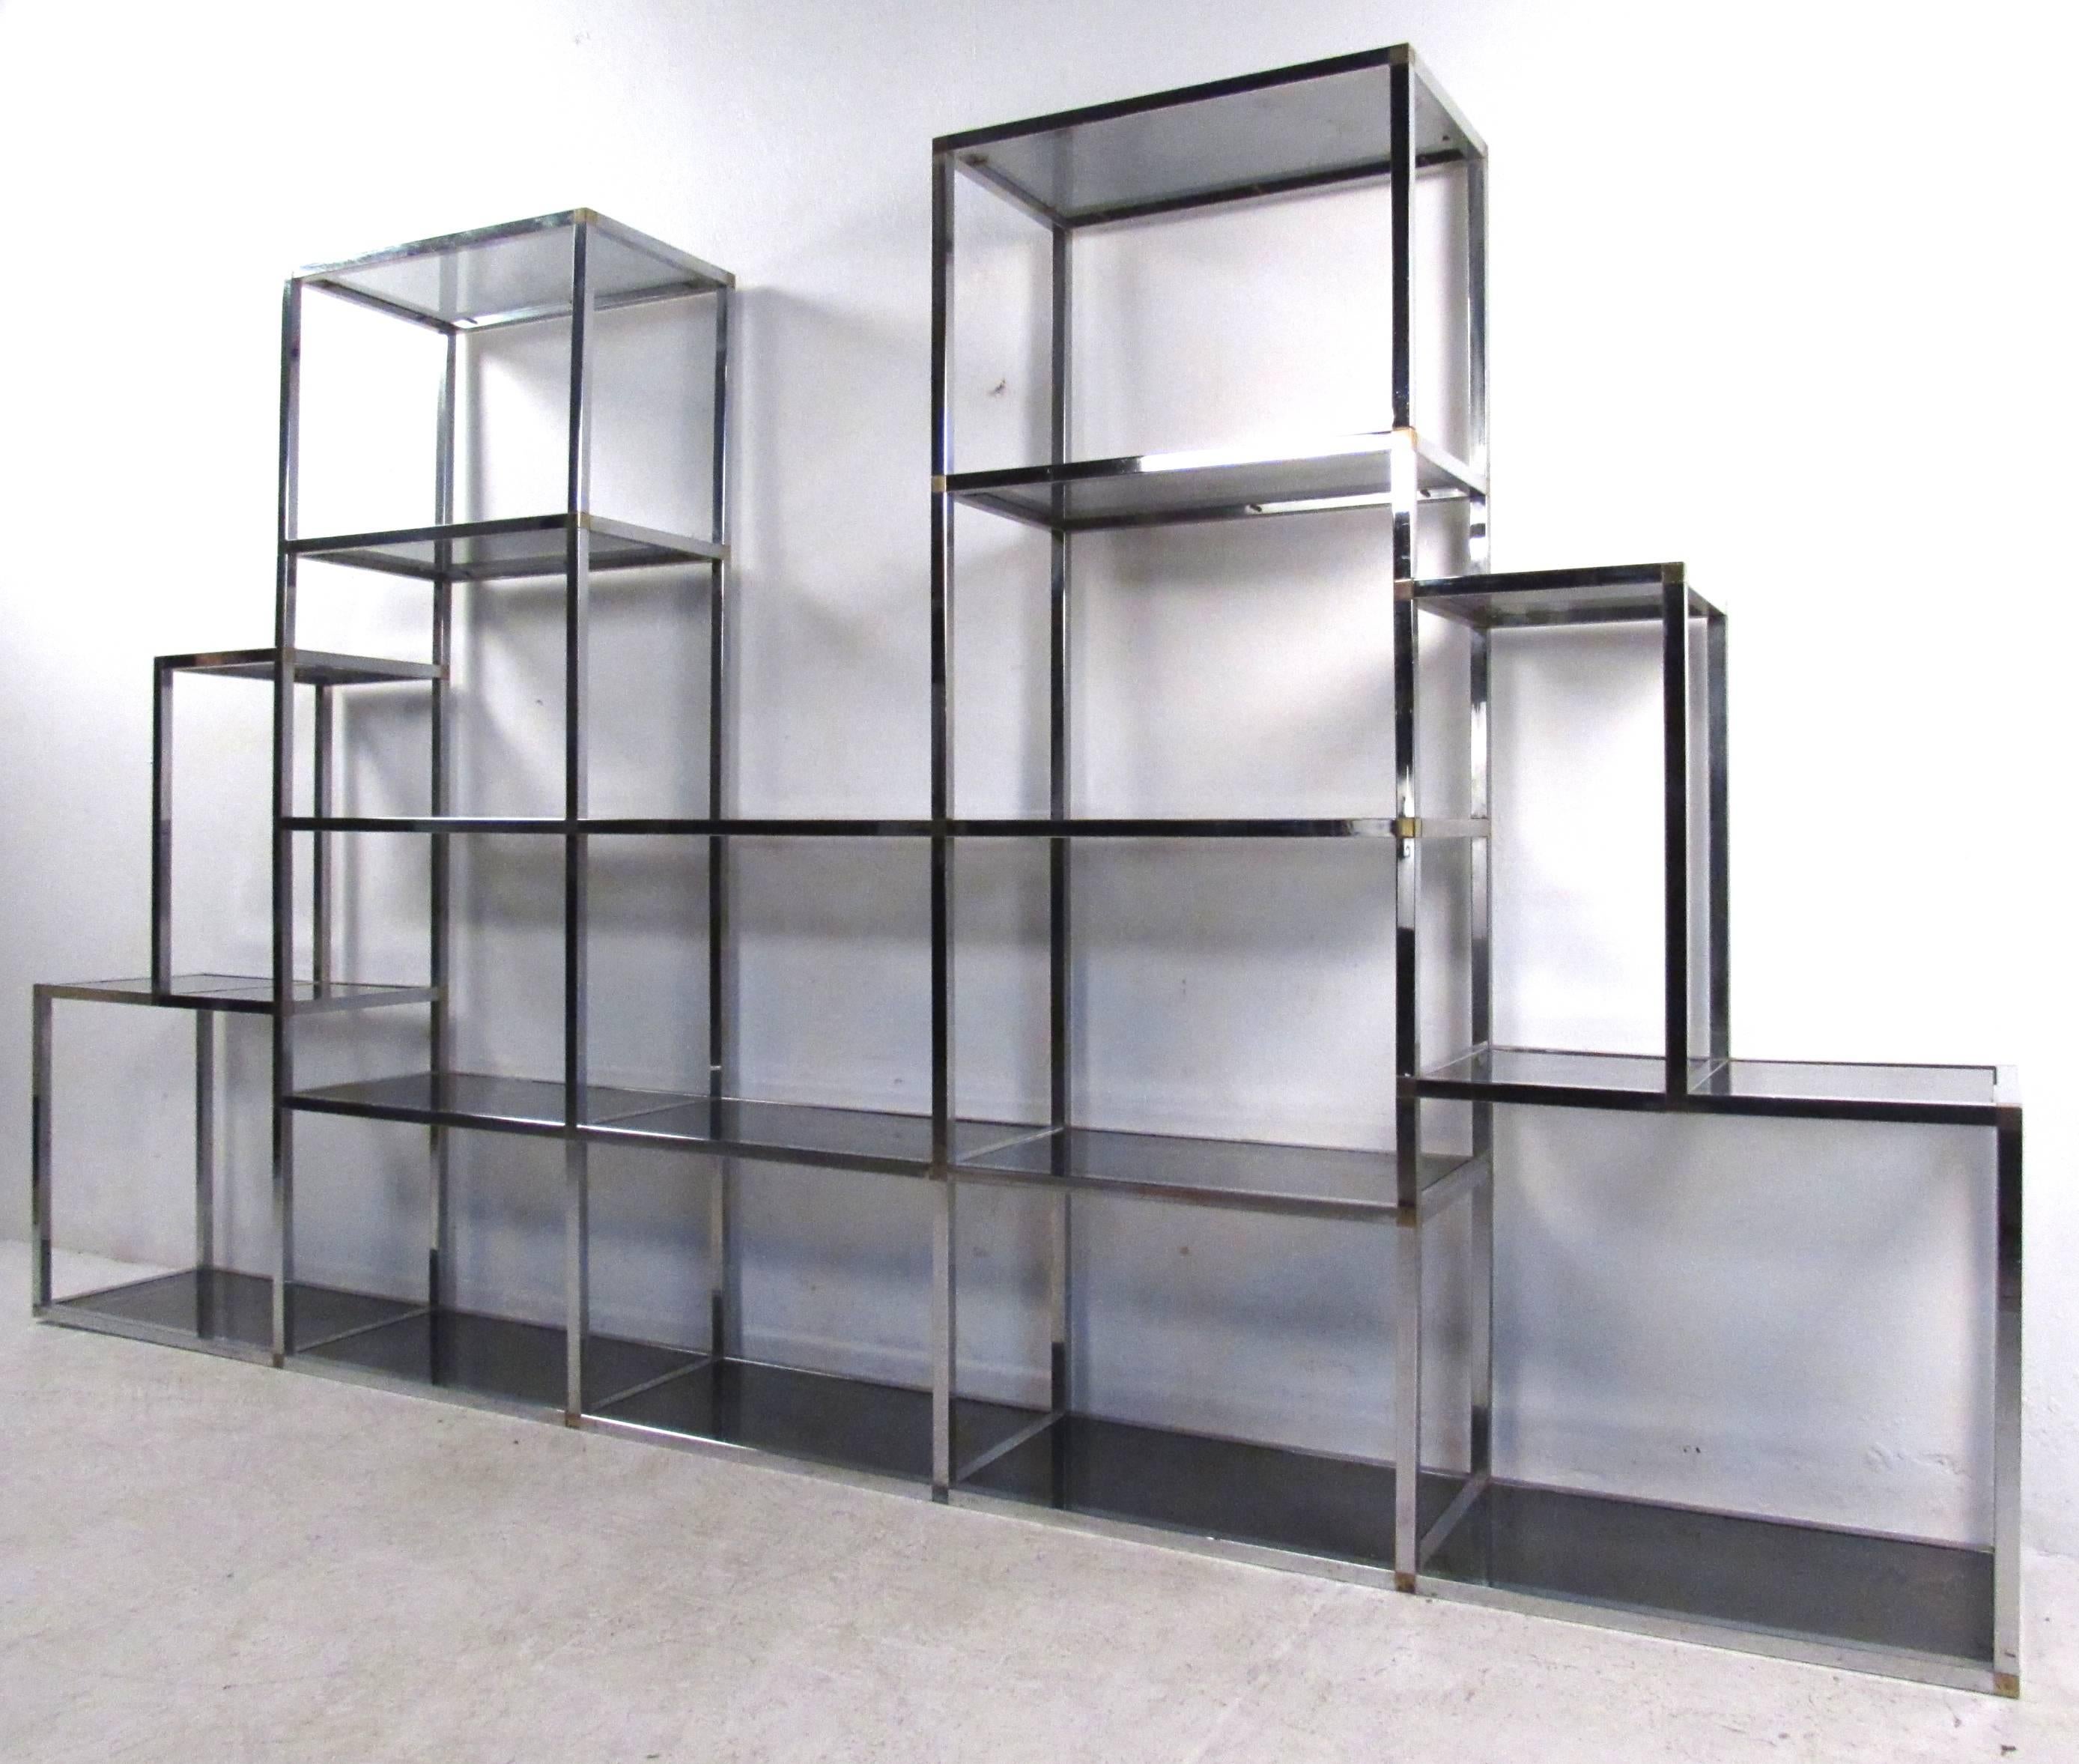 This large and impressive Mid-Century chrome and glass etagere features a unique layout, with staggered smoked glass shelves perfect for home or shop display. Excellent storage piece makes a wonderful addition to any interior, home or business.